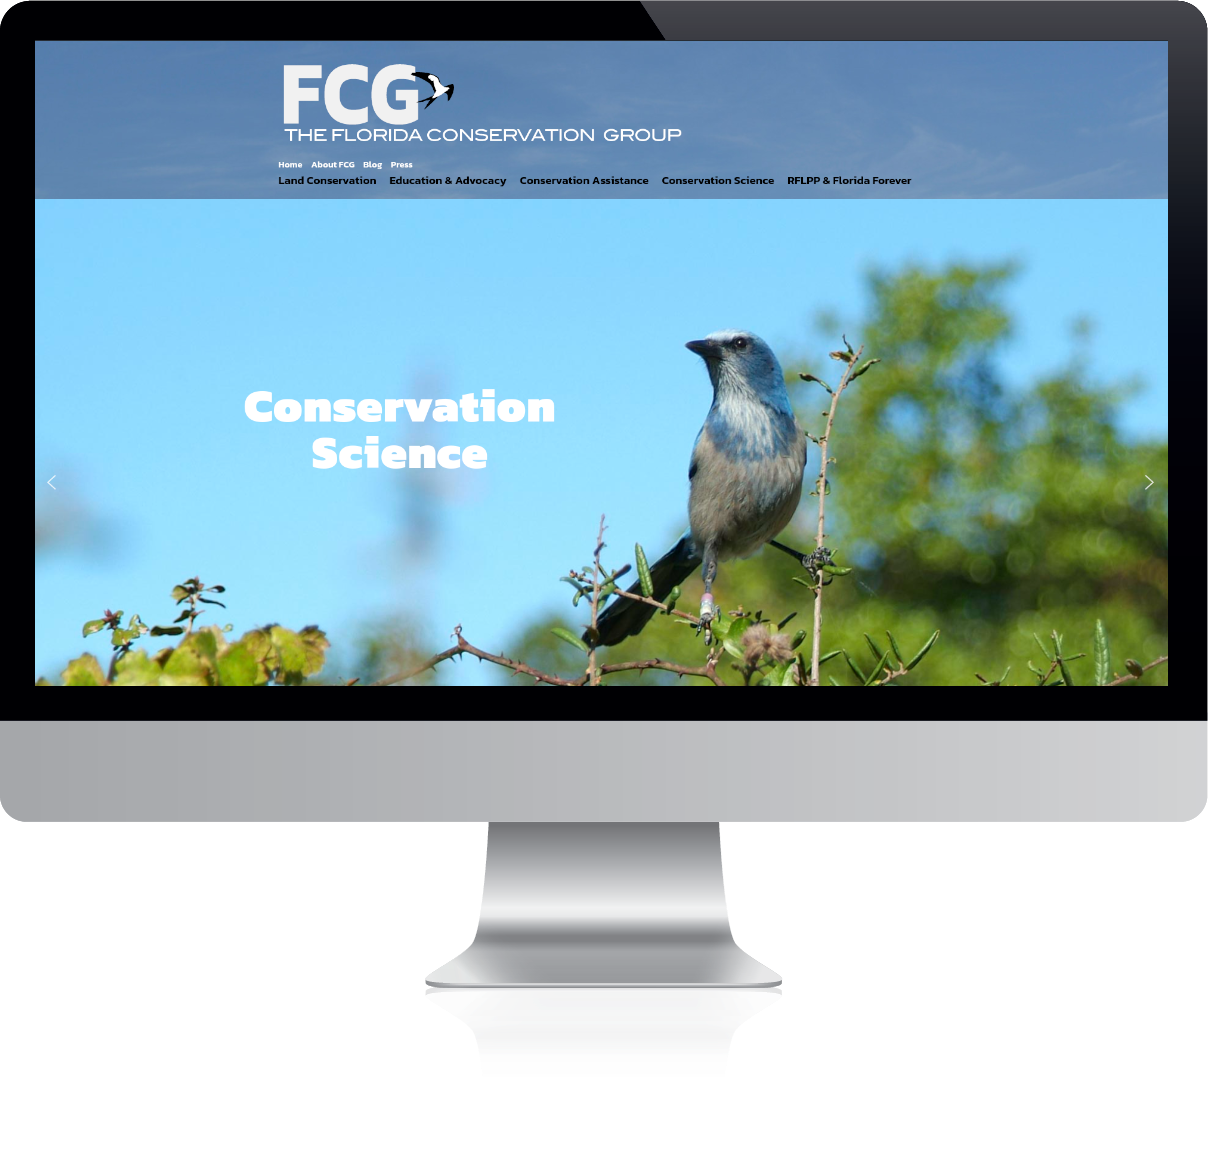 Florida Conservation Group